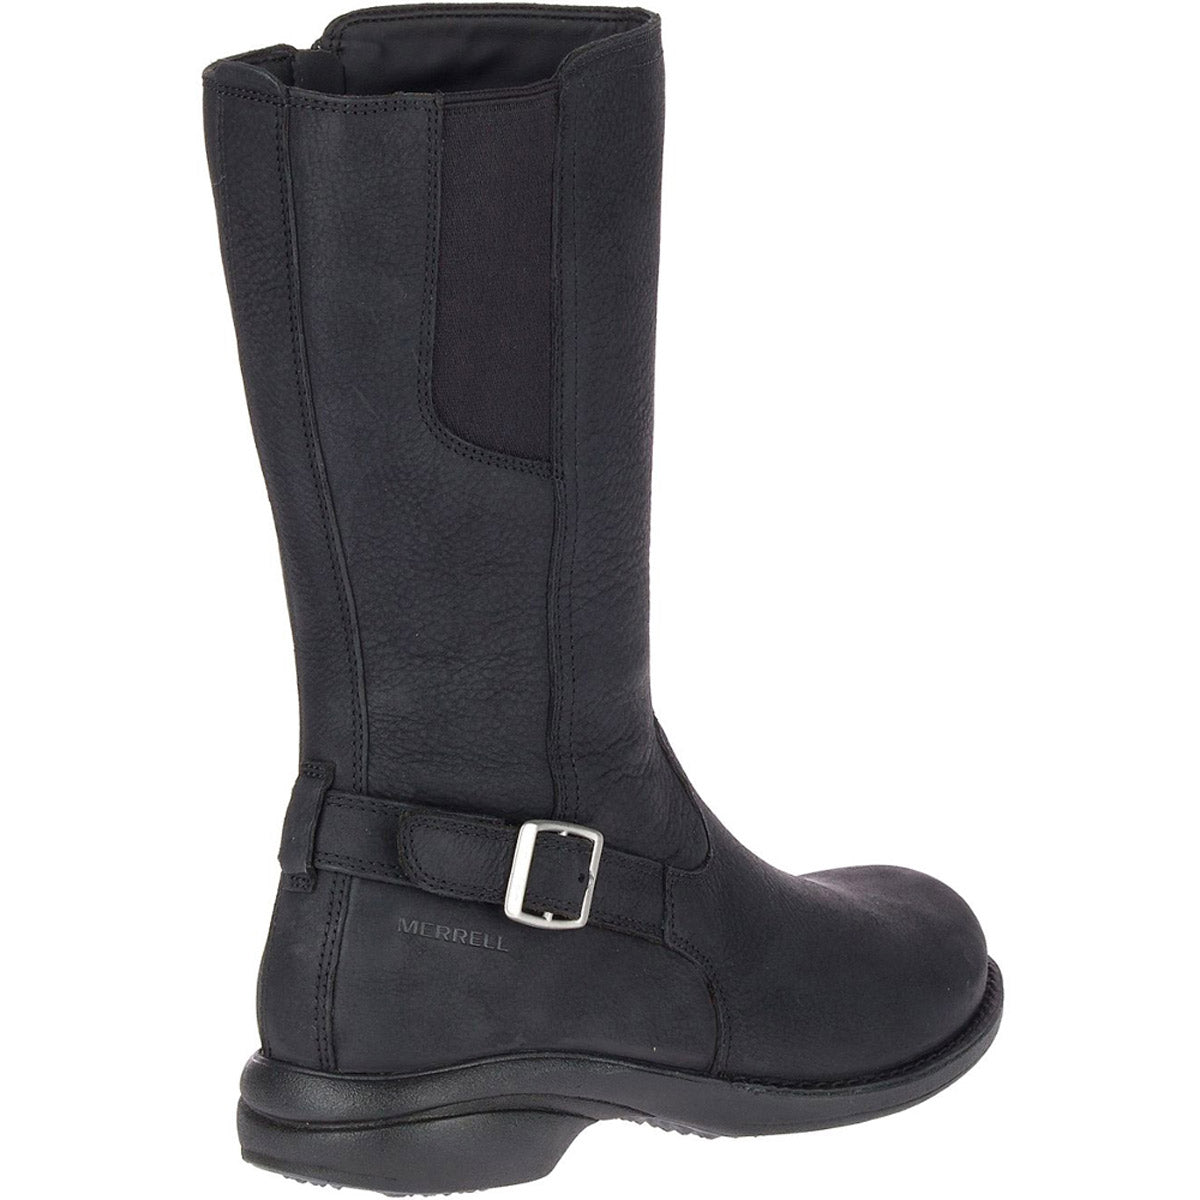 Merrell MERRELL ANDOVER PEAK BLACK - WOMENS mid-calf waterproof leather boots with side buckle detail.